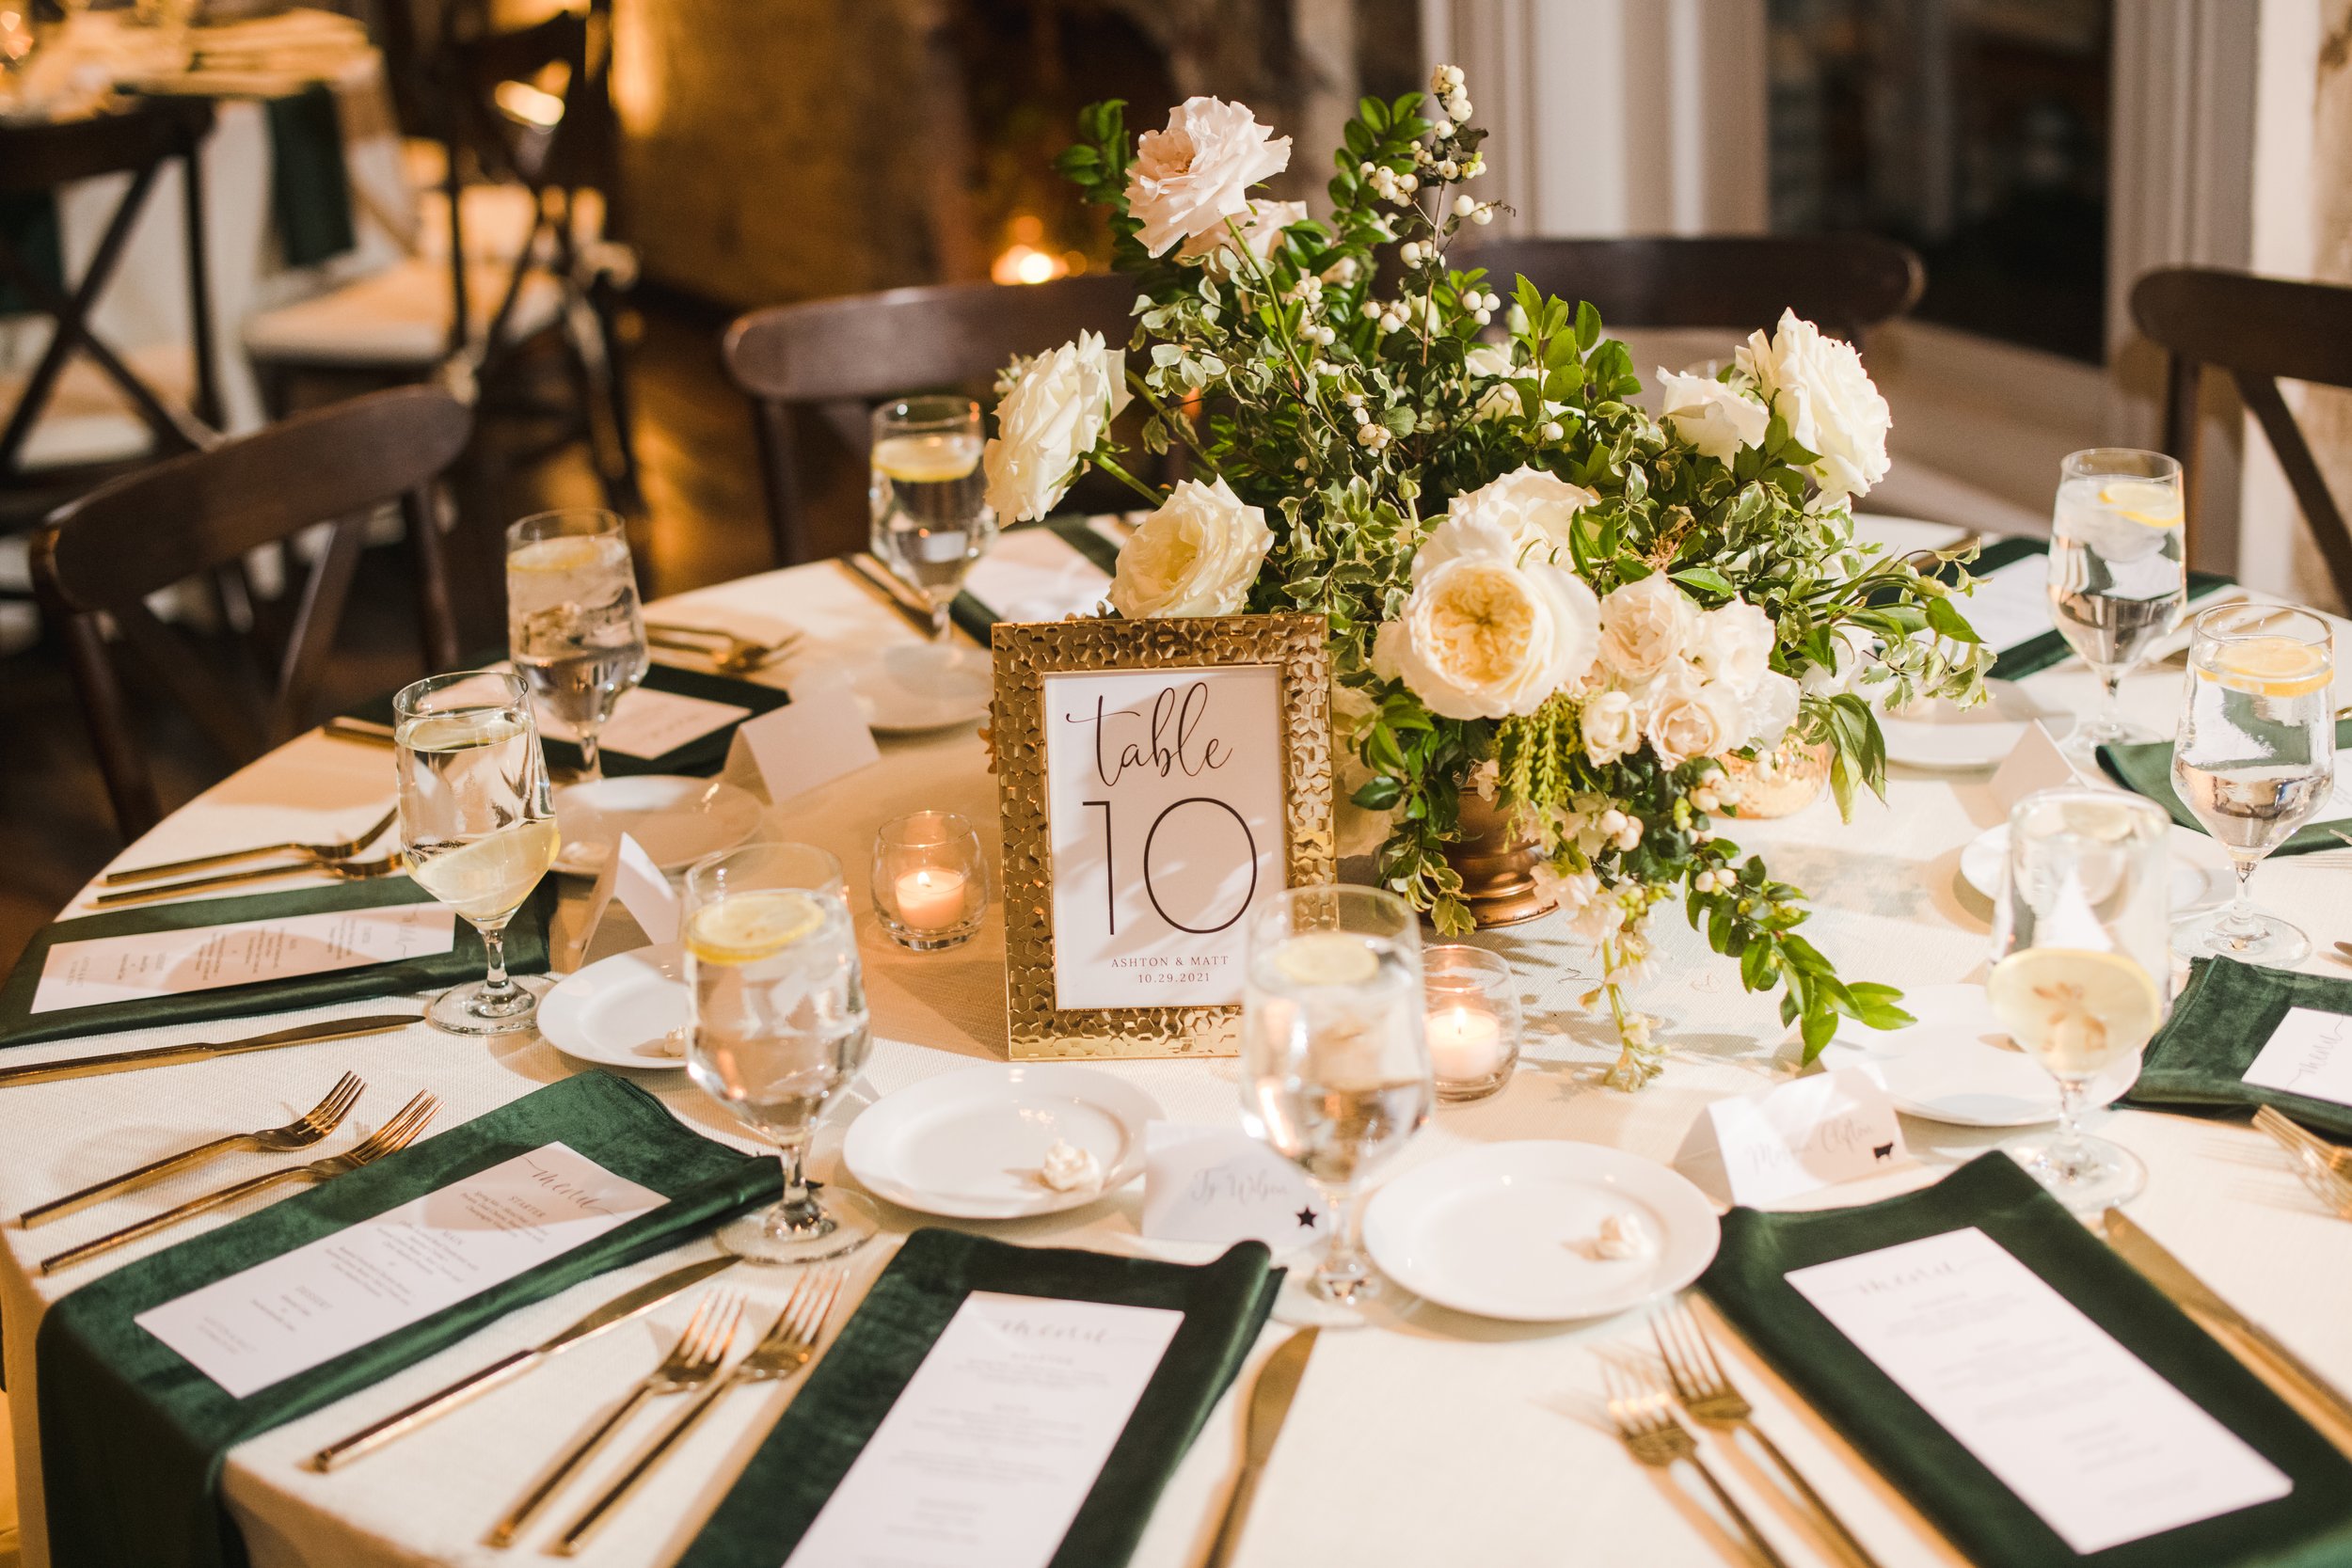 Low floral centerpieces for elegant winter wedding overflowing with white garden roses, dried hydrangeas, scabiosa, berries, lisianthus, ranunculus, and natural dark greenery. Designed by Rosemary and Finch in Nashville, TN.